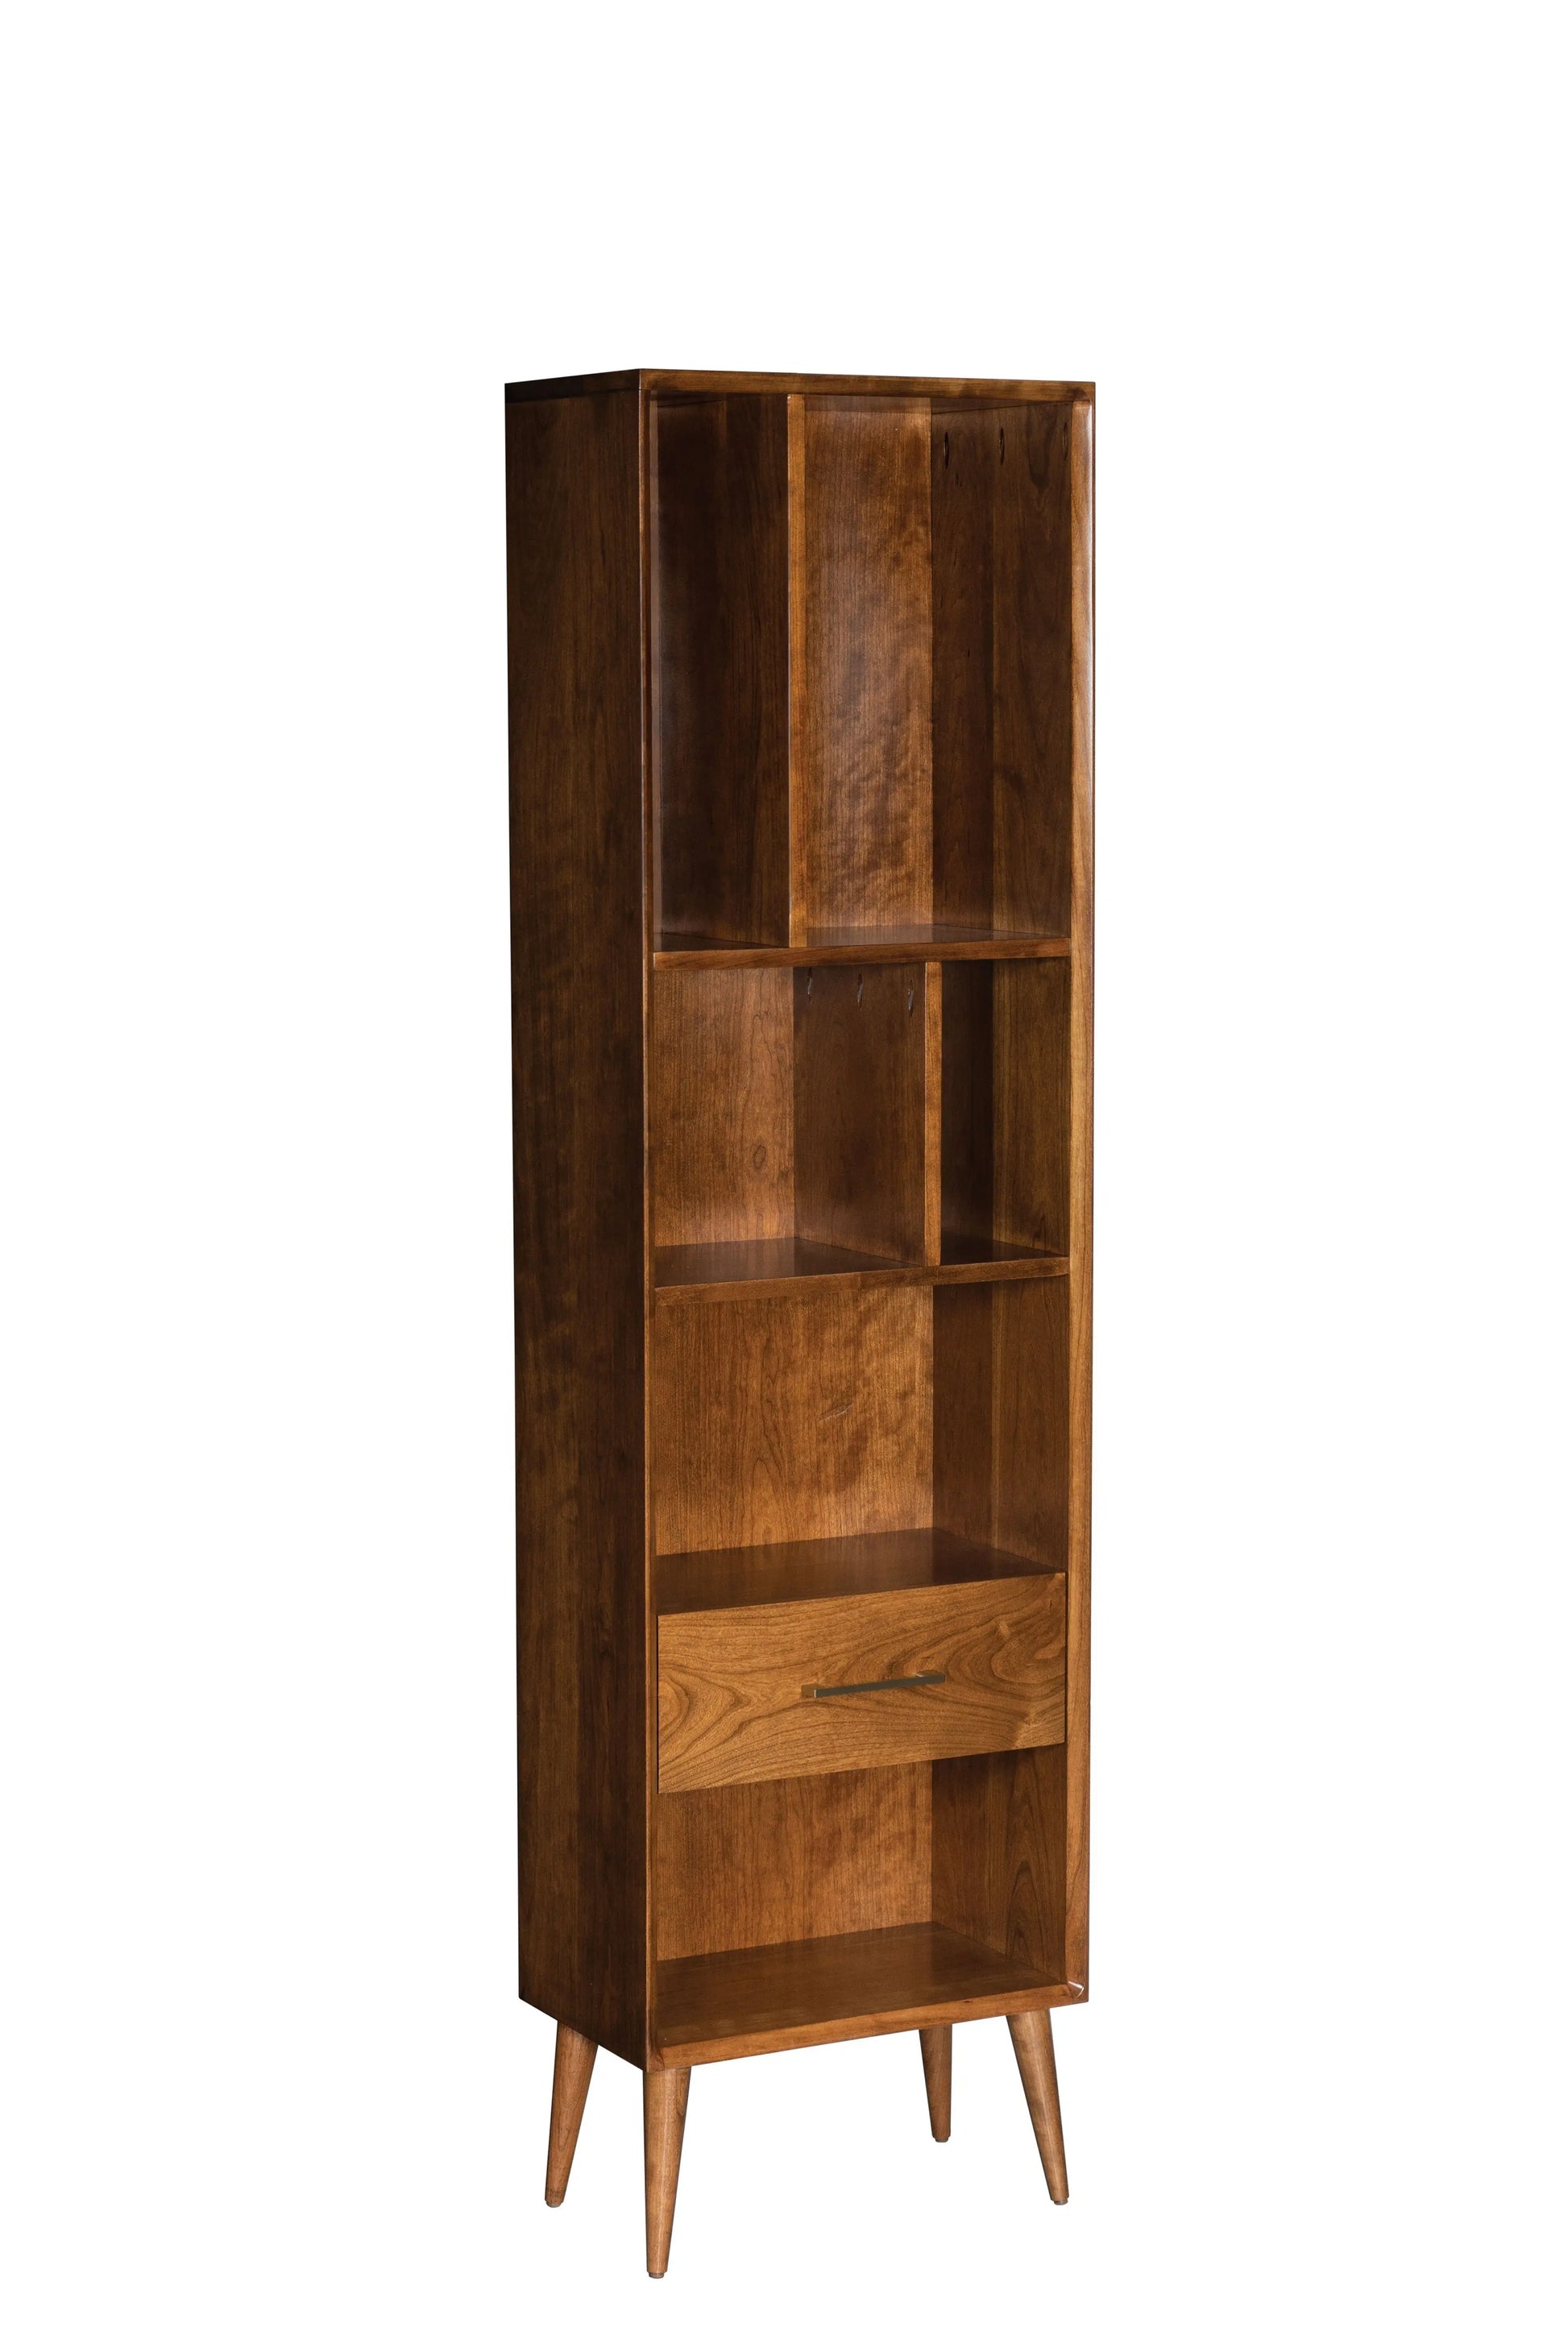 South Shore Bookcase w/ Left-Right Shelf Options Moderncre8ve